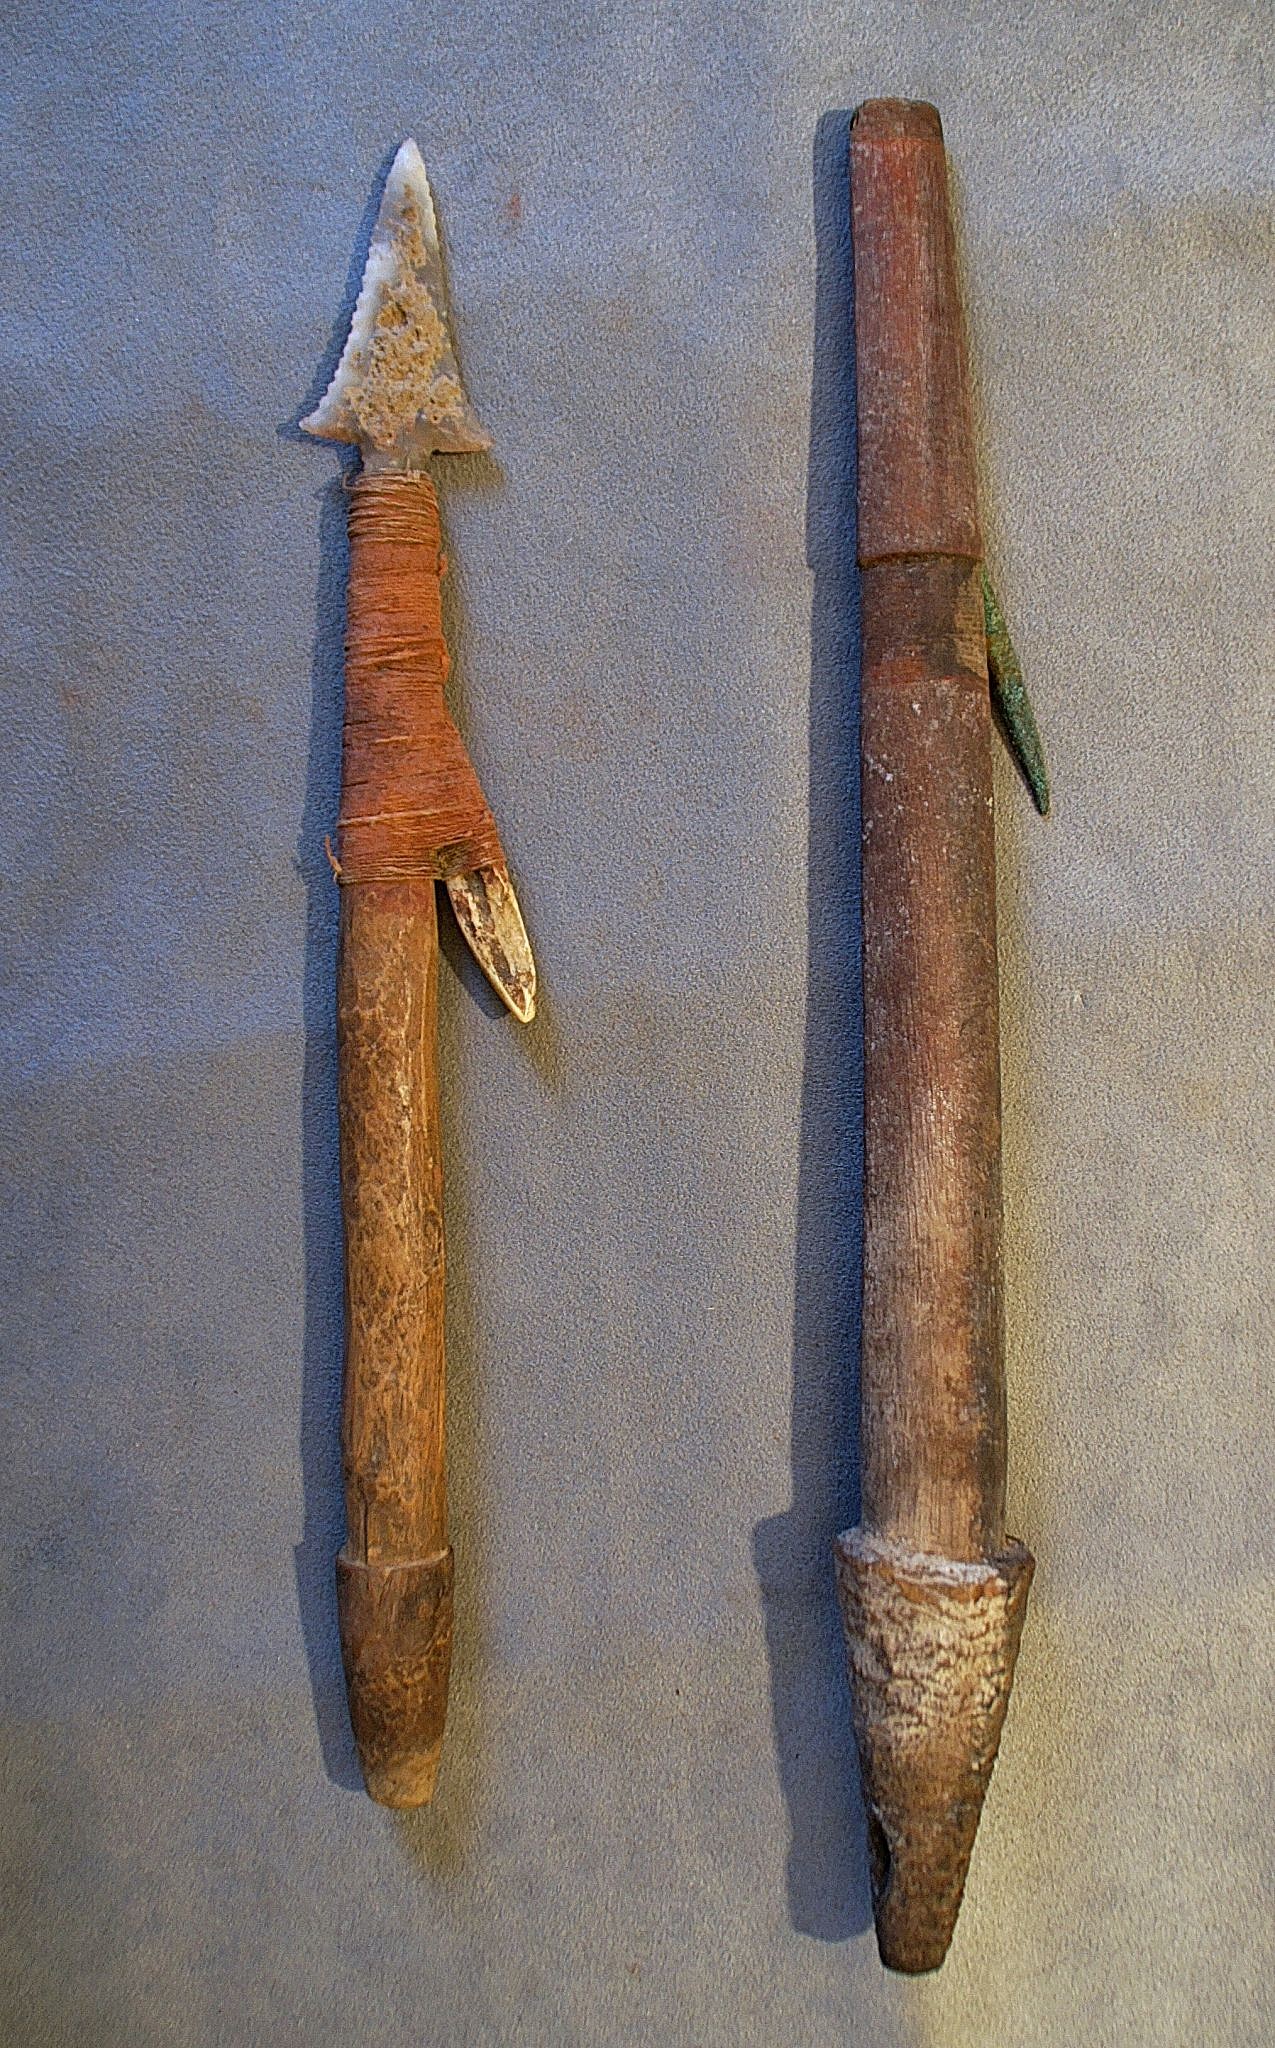 Chile, Two Harpoon Forepoints with Bone and Copper Barb
These harpoons were used for hunting for sea lion.  The barbs are set into a carved notch and lashed with cotton thread.  The other end is tapered to fit into a harpoon pole.  The copper barb was used for hunting larger animals.
Media: Wood
Dimensions: Lengths: 12" &  16"
n6035